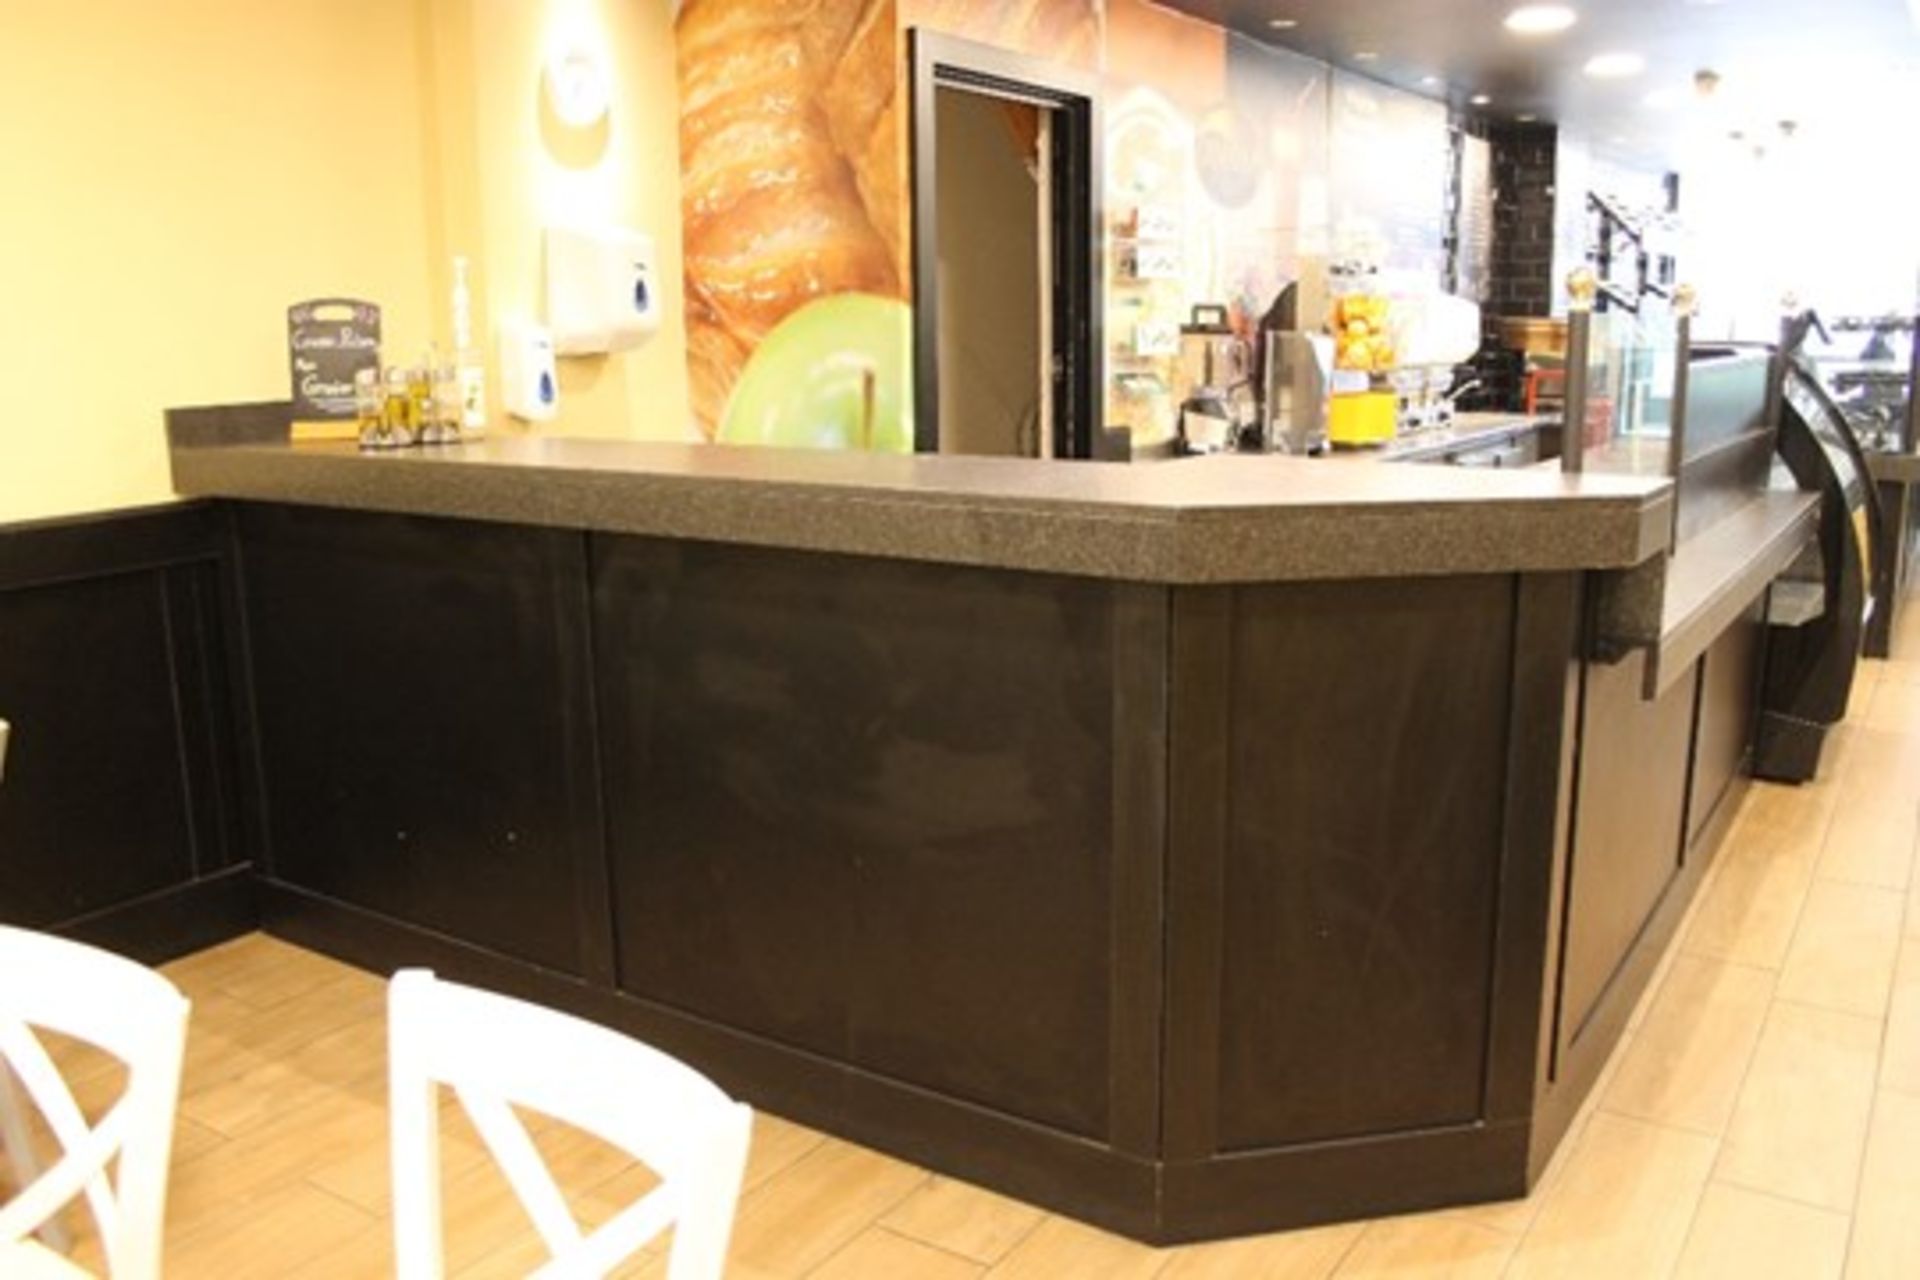 Huge Cafeteria Corner Service Counter – approx. W330cm x D80cm to the front + 300cm x 80cm right